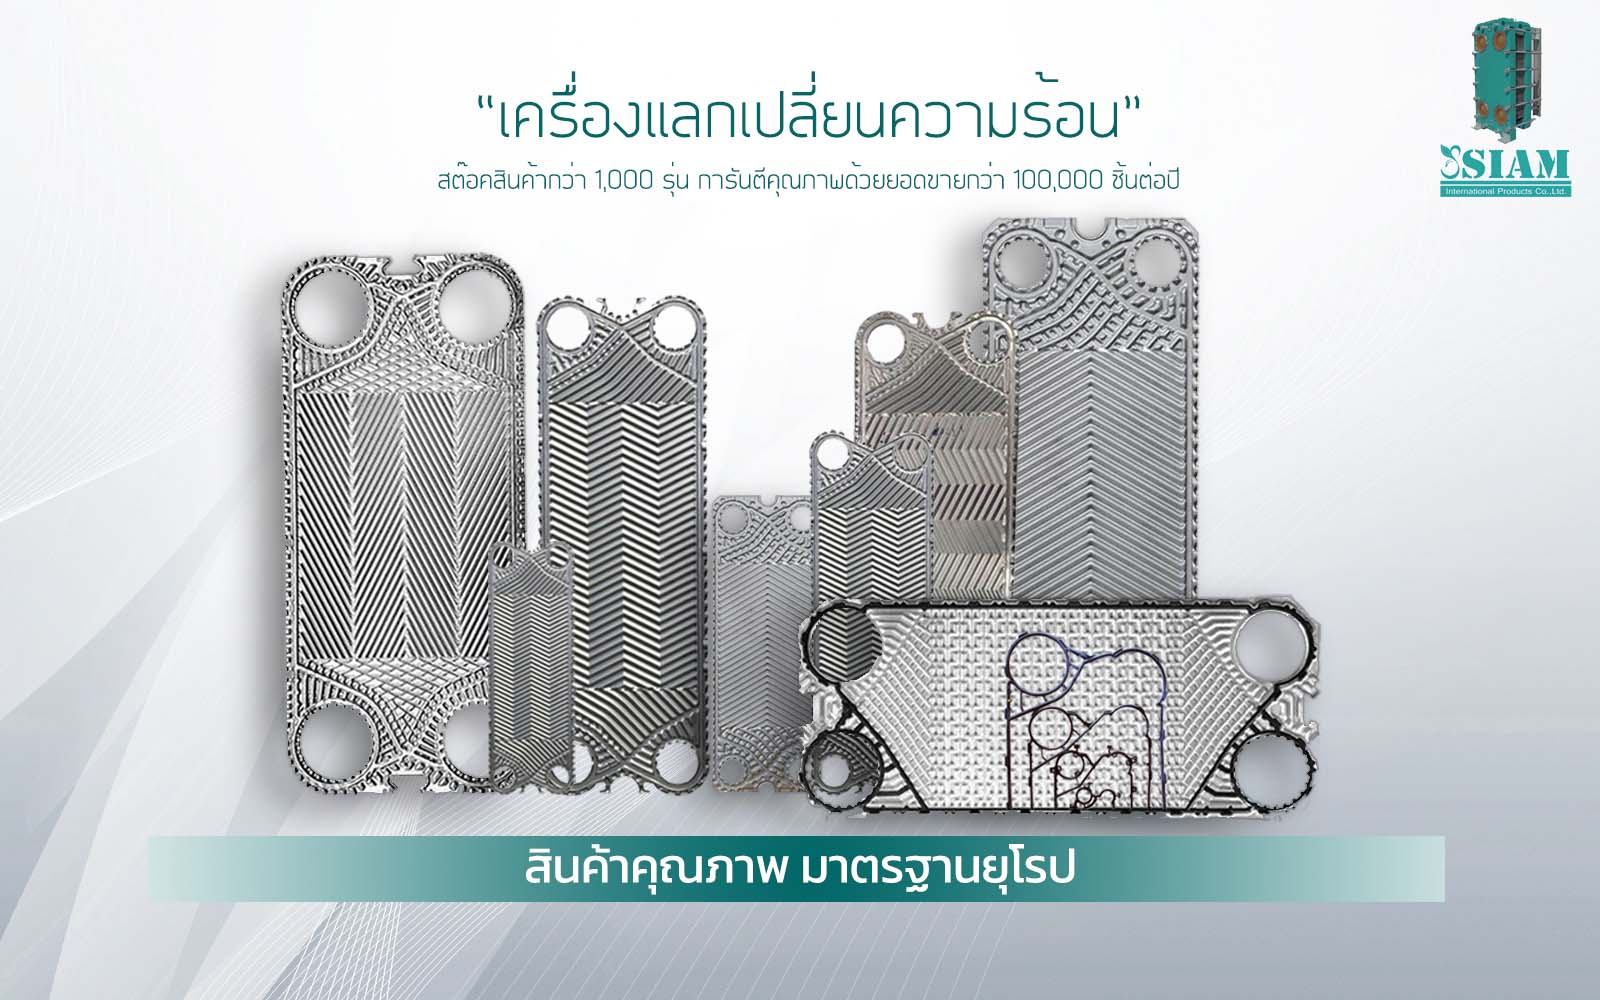 Spare part for Heat exchanger